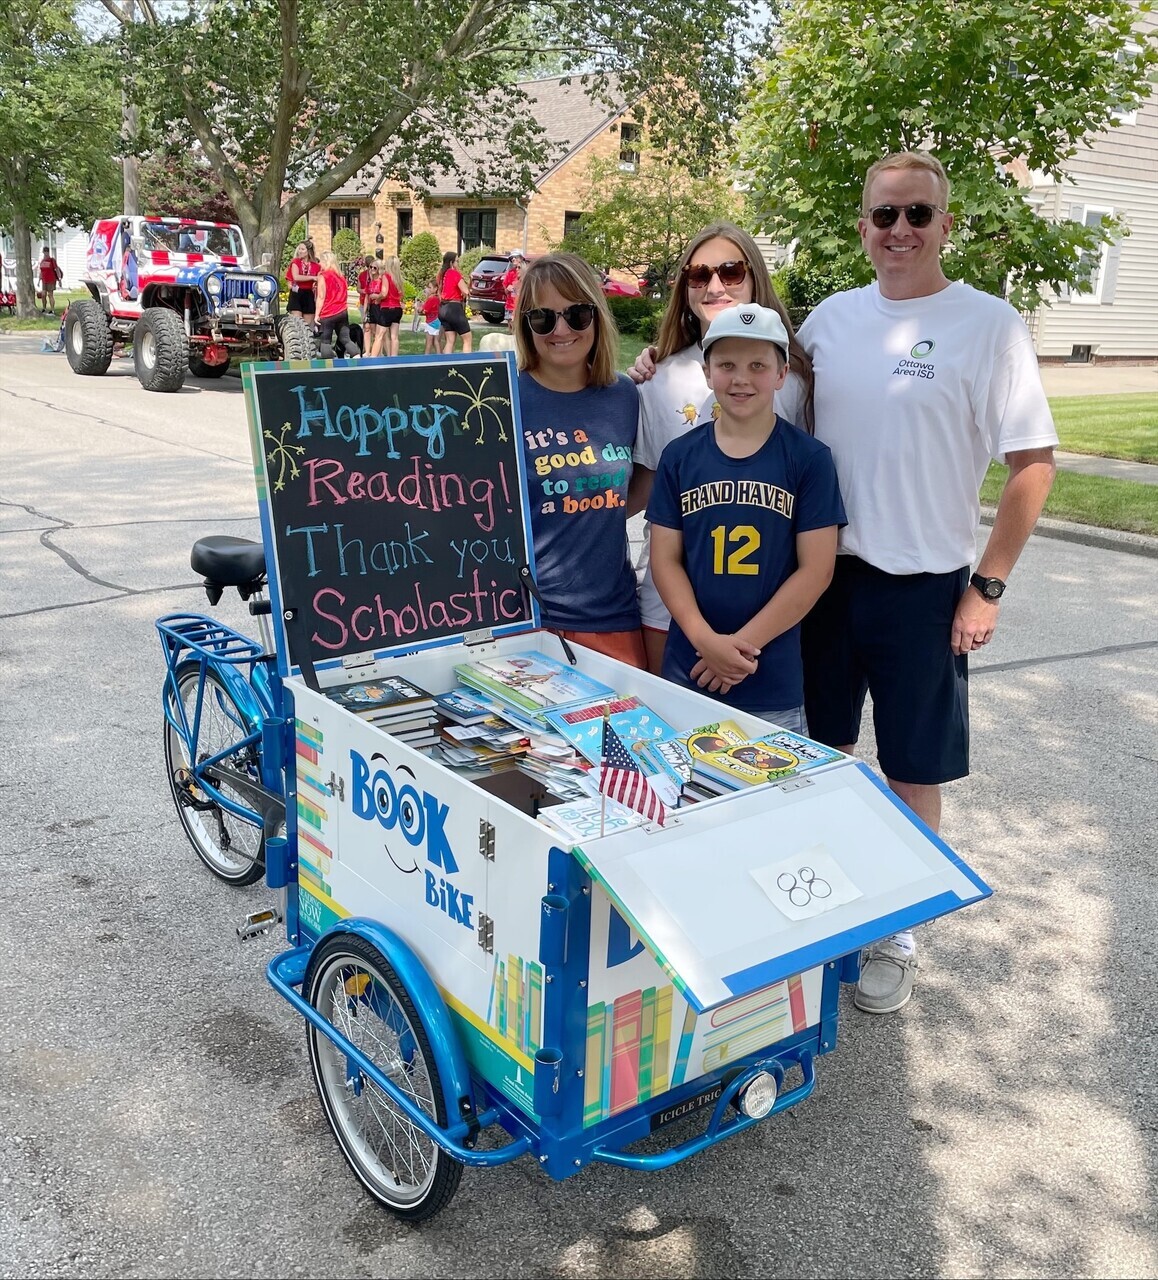 Kyle Mayer with the book bike and his family